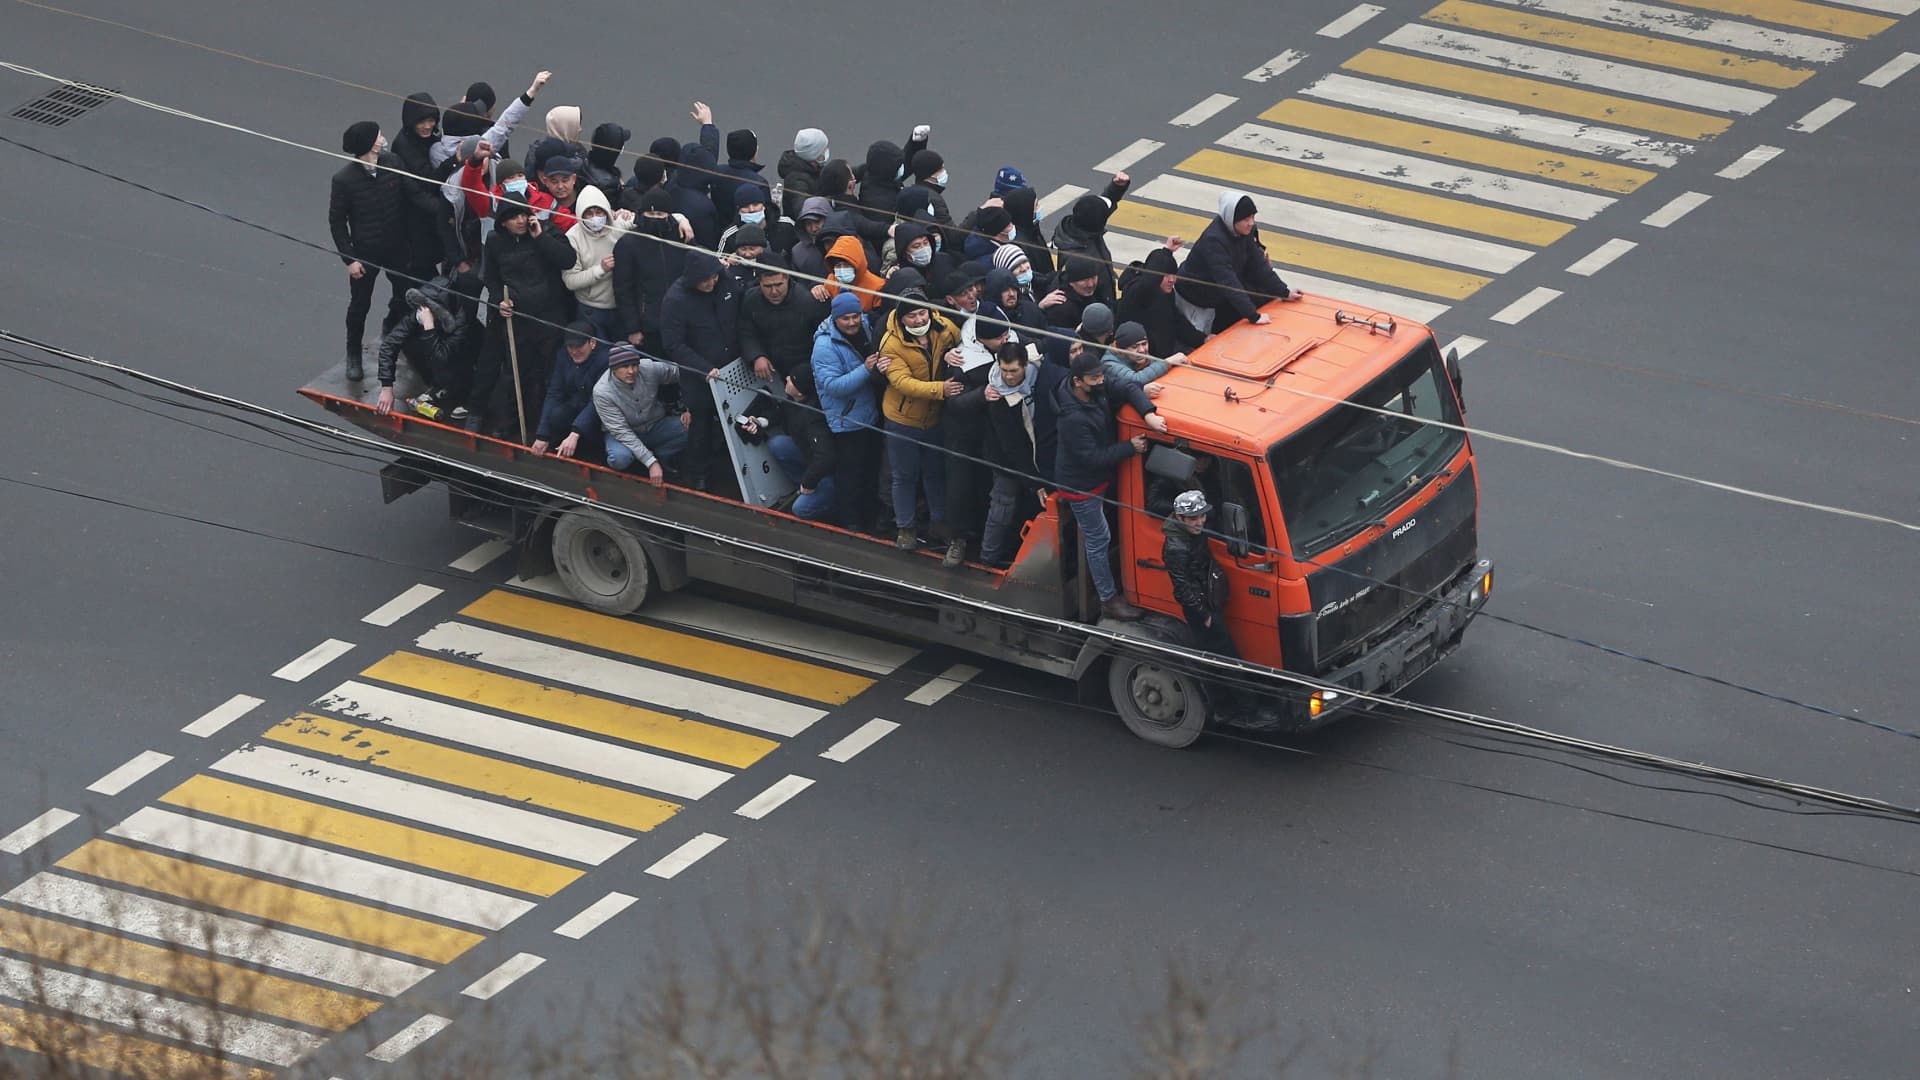 Demonstrators ride a truck during a protest triggered by fuel price increase in Almaty, Kazakhstan January 5, 2022.